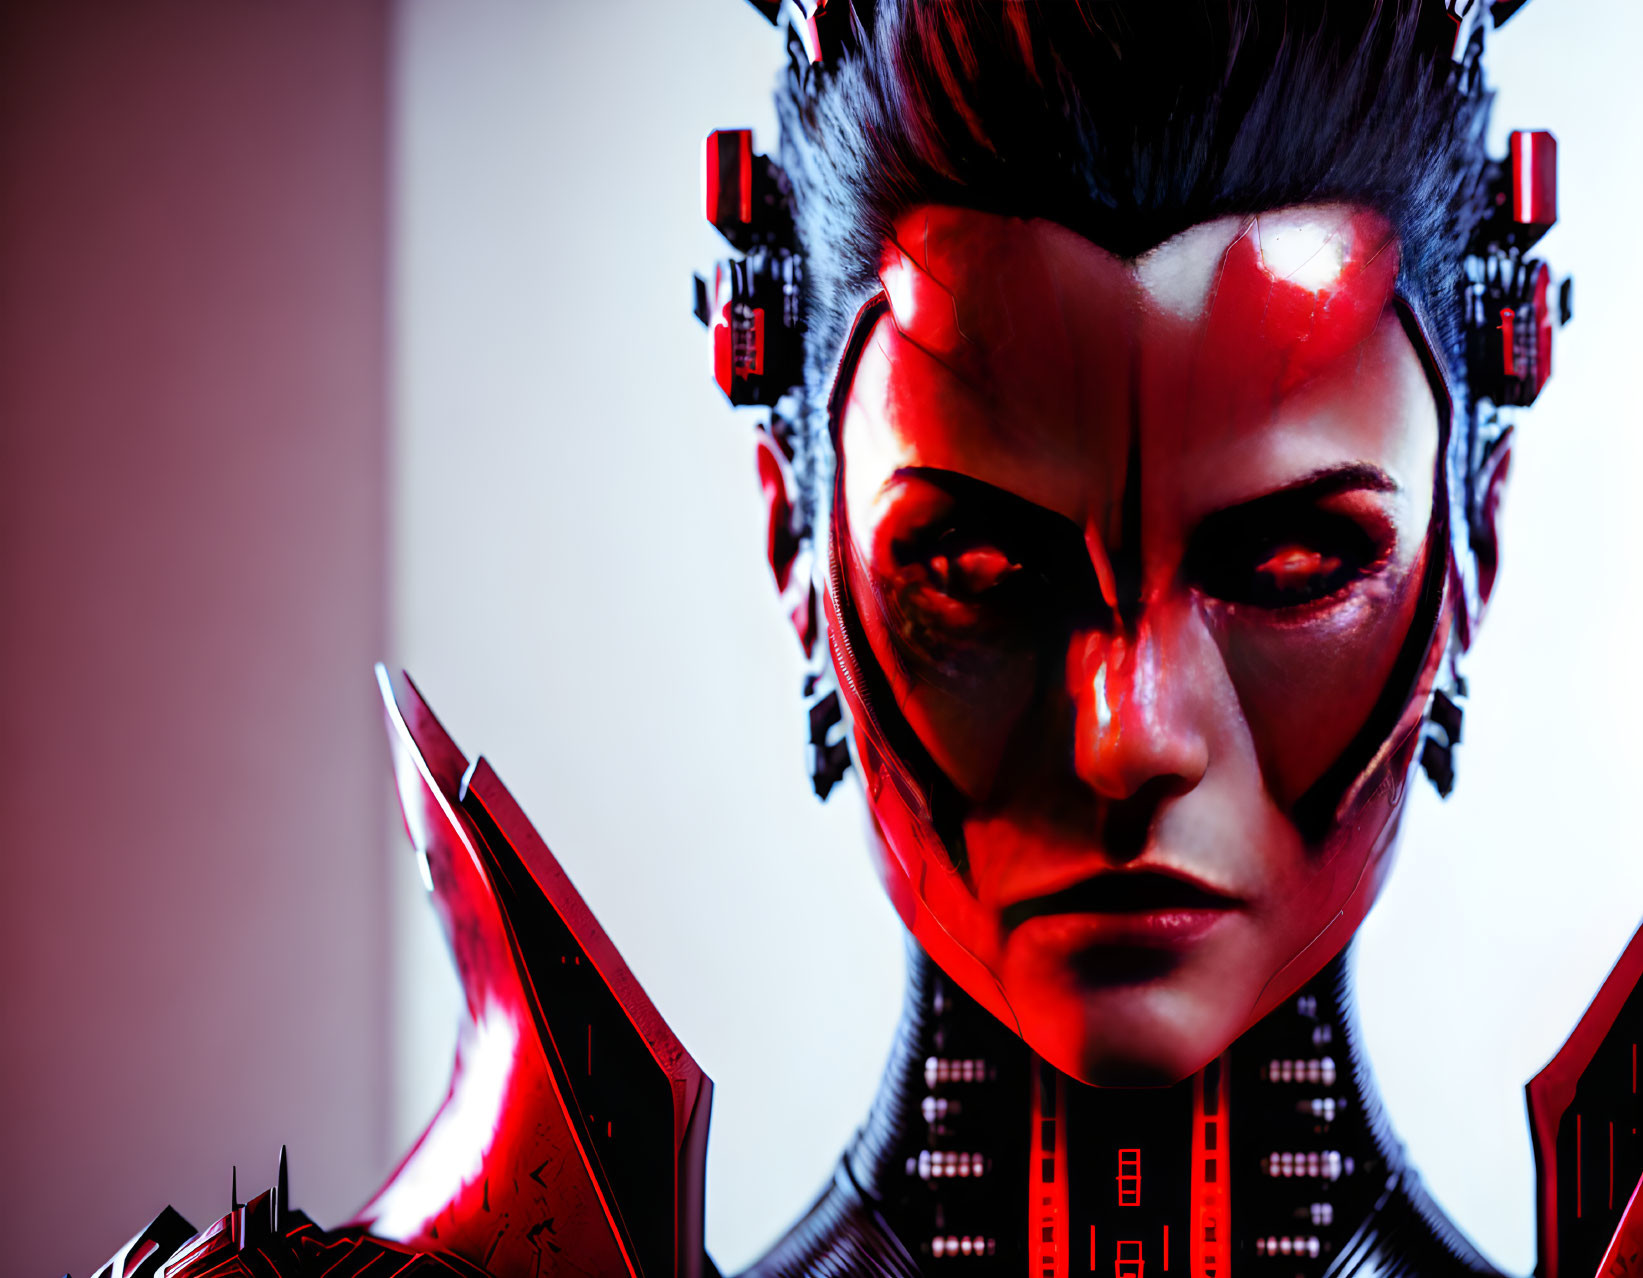 Female Cyborg with Red Facial Markings and High-Tech Headset